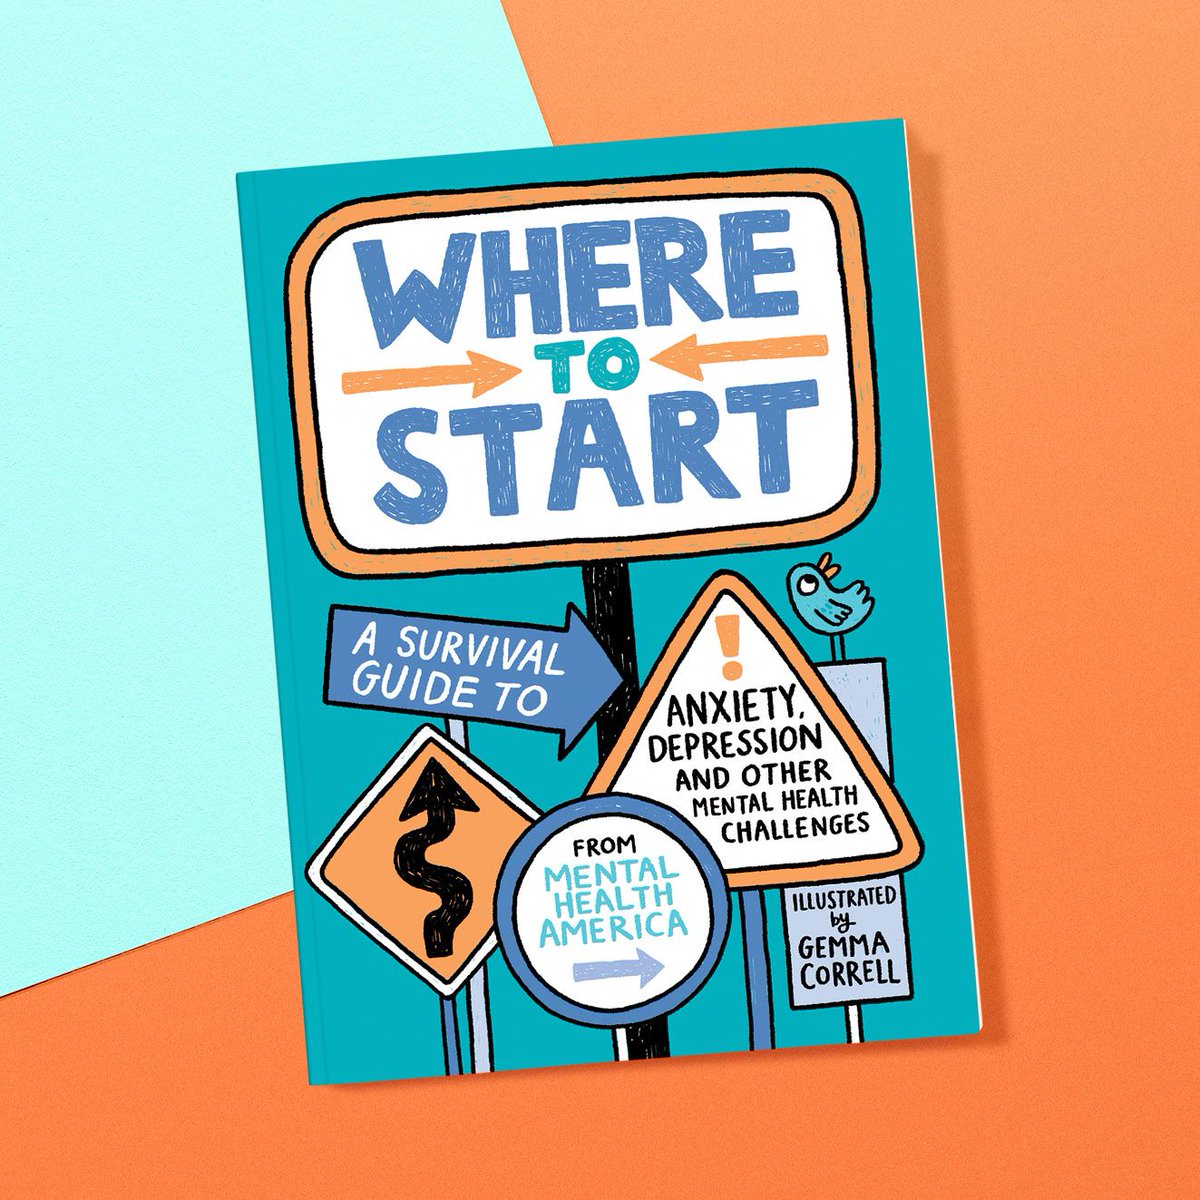 Have you gotten your paperback copy of “Where to Start” yet? Get your copy today in time for #MentalHealthMonth in May! 🧡 buff.ly/3PW4qbb